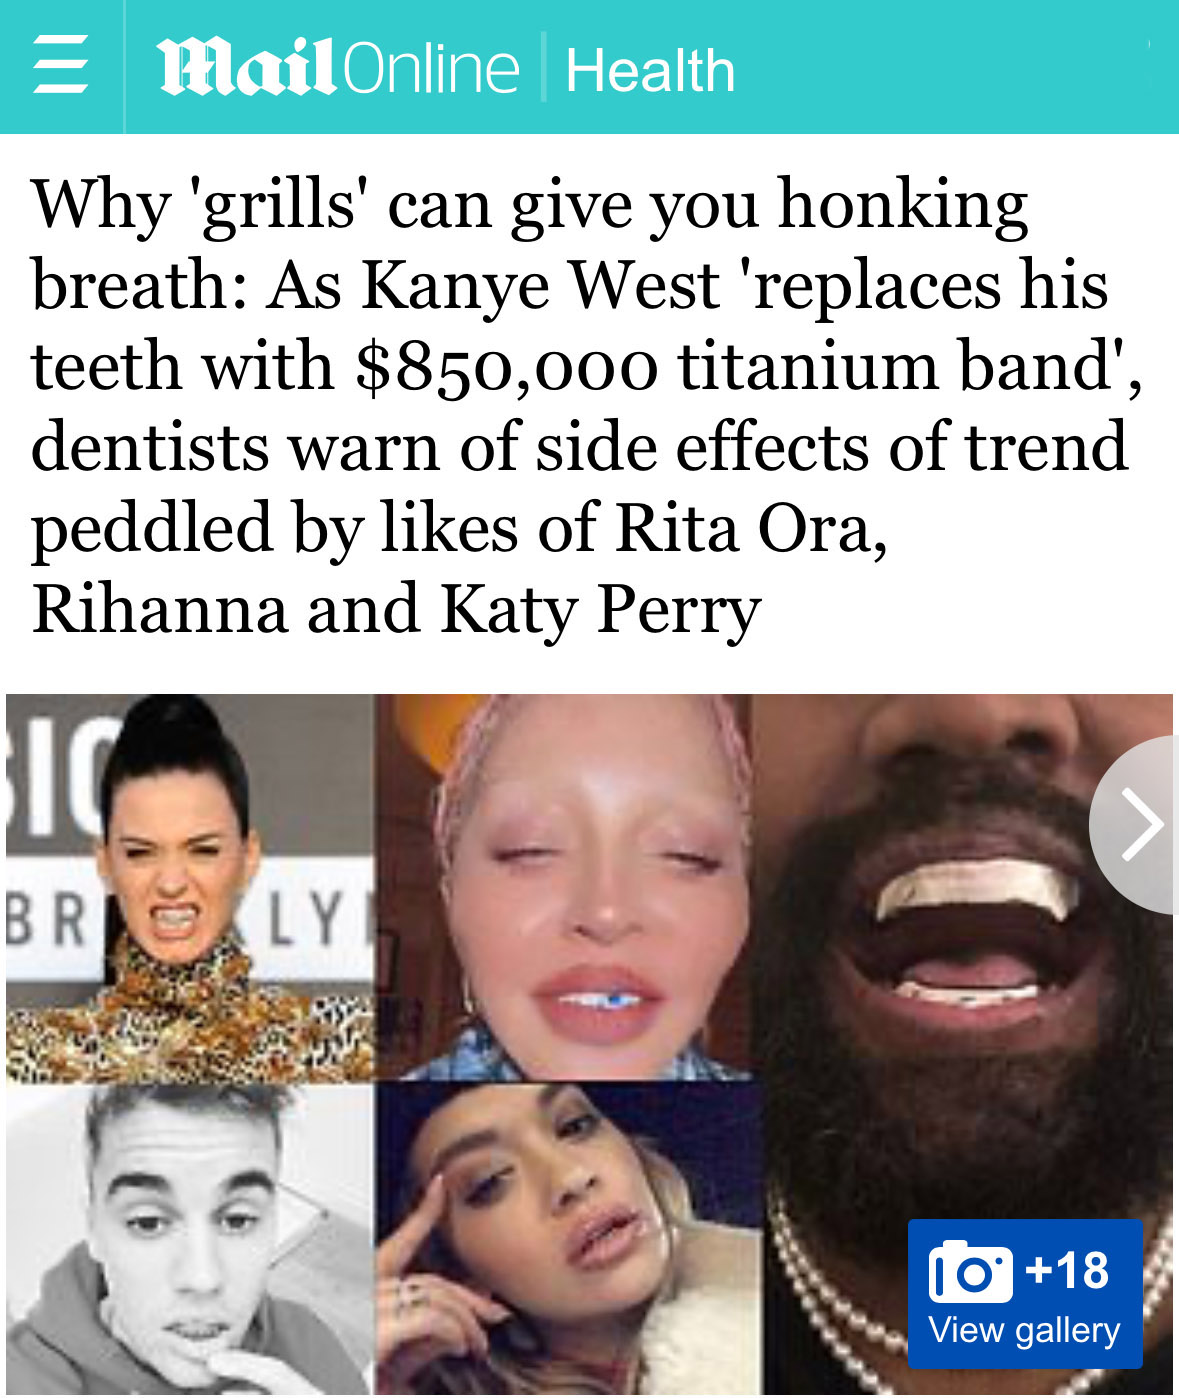 Mail Online
<br/>
<br/>
Why 'grills' can give you honking breath